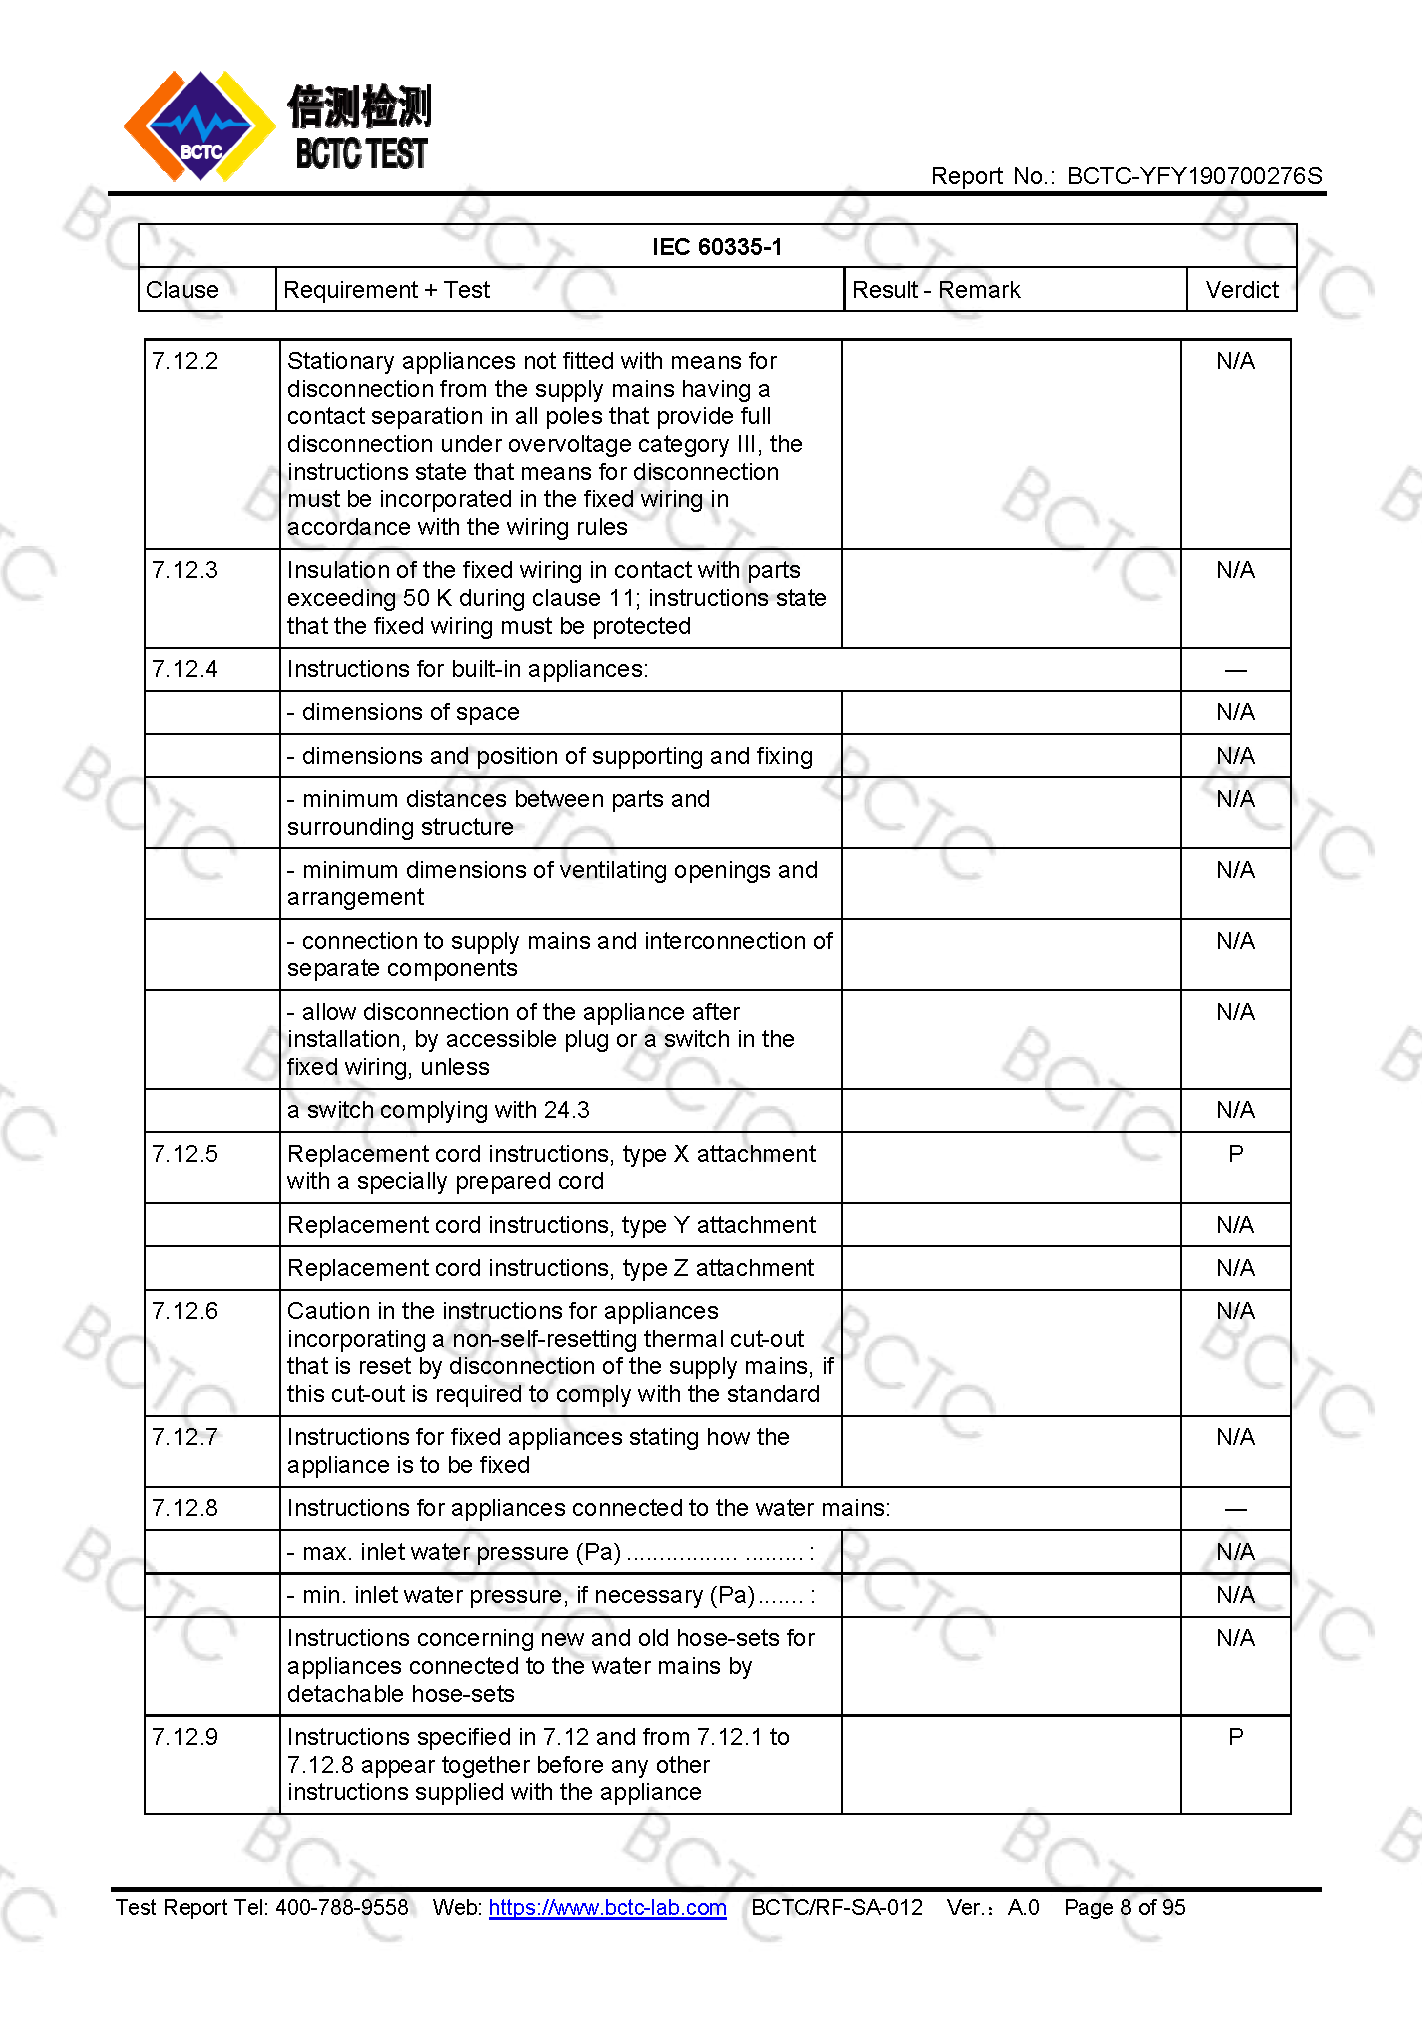 Tri-Oxy COMPLETE LVD Test Report Page 8